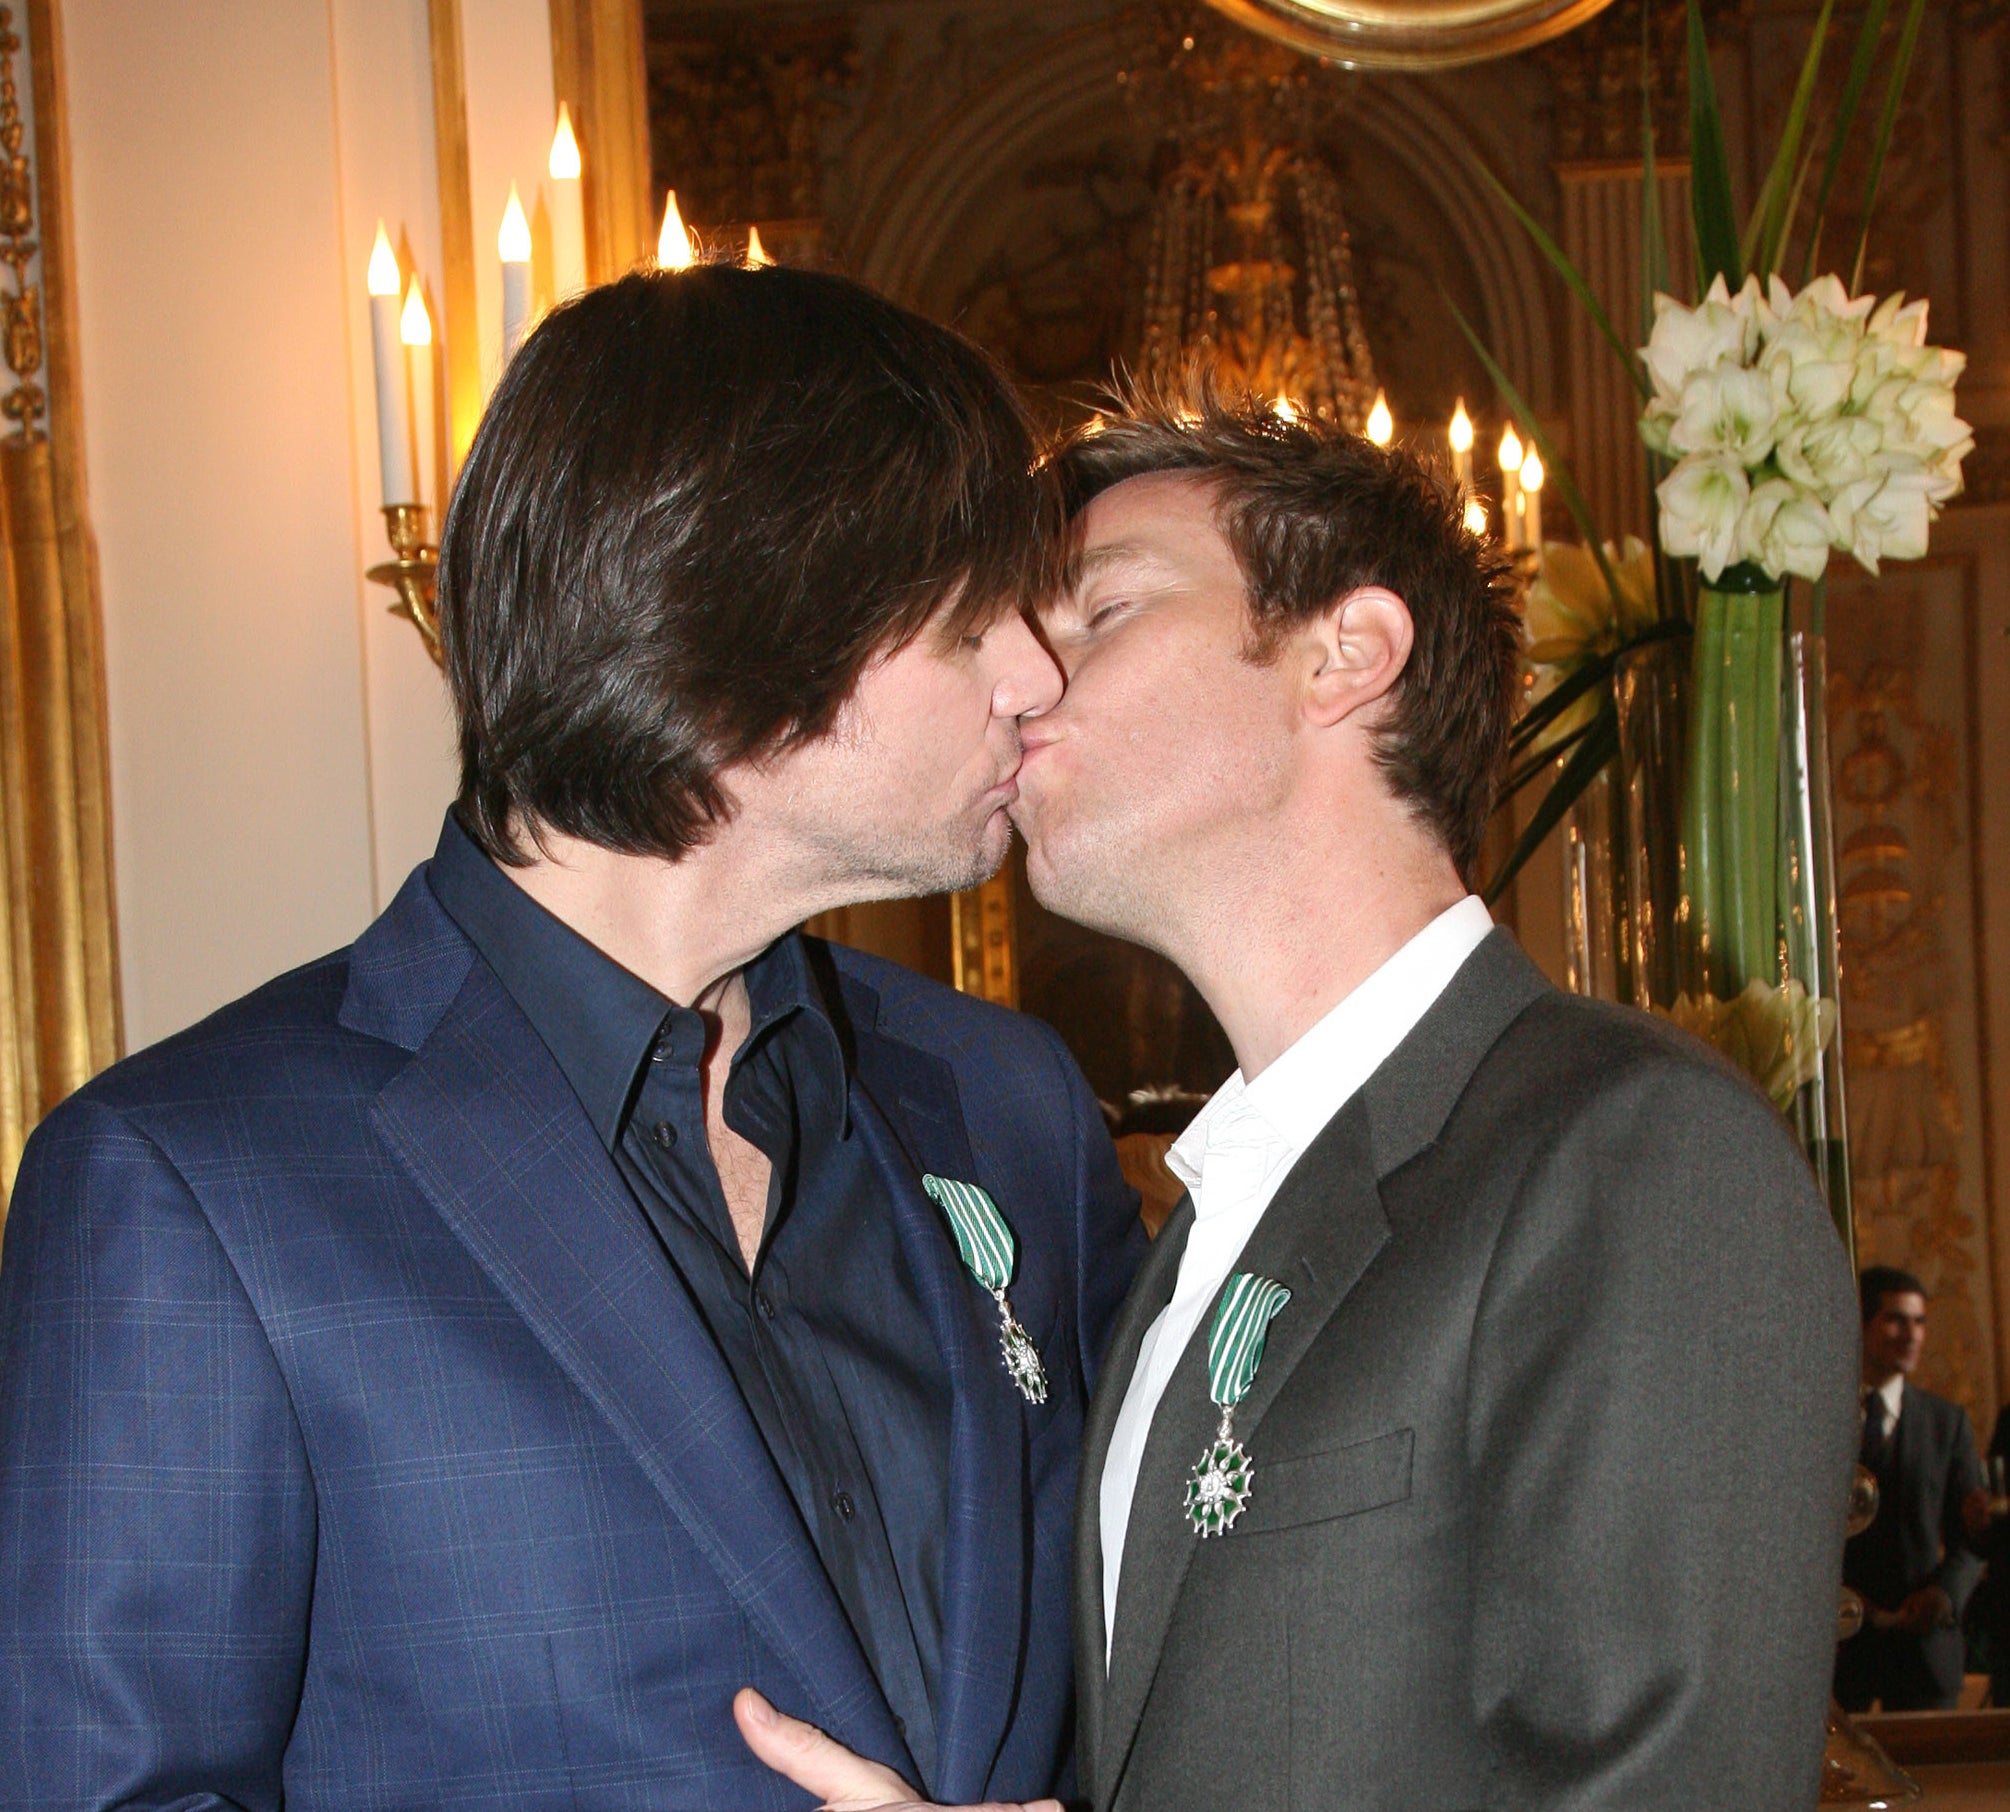 7. Jim Carrey and Ewan McGregor kissed in Paris after they were knighted by...